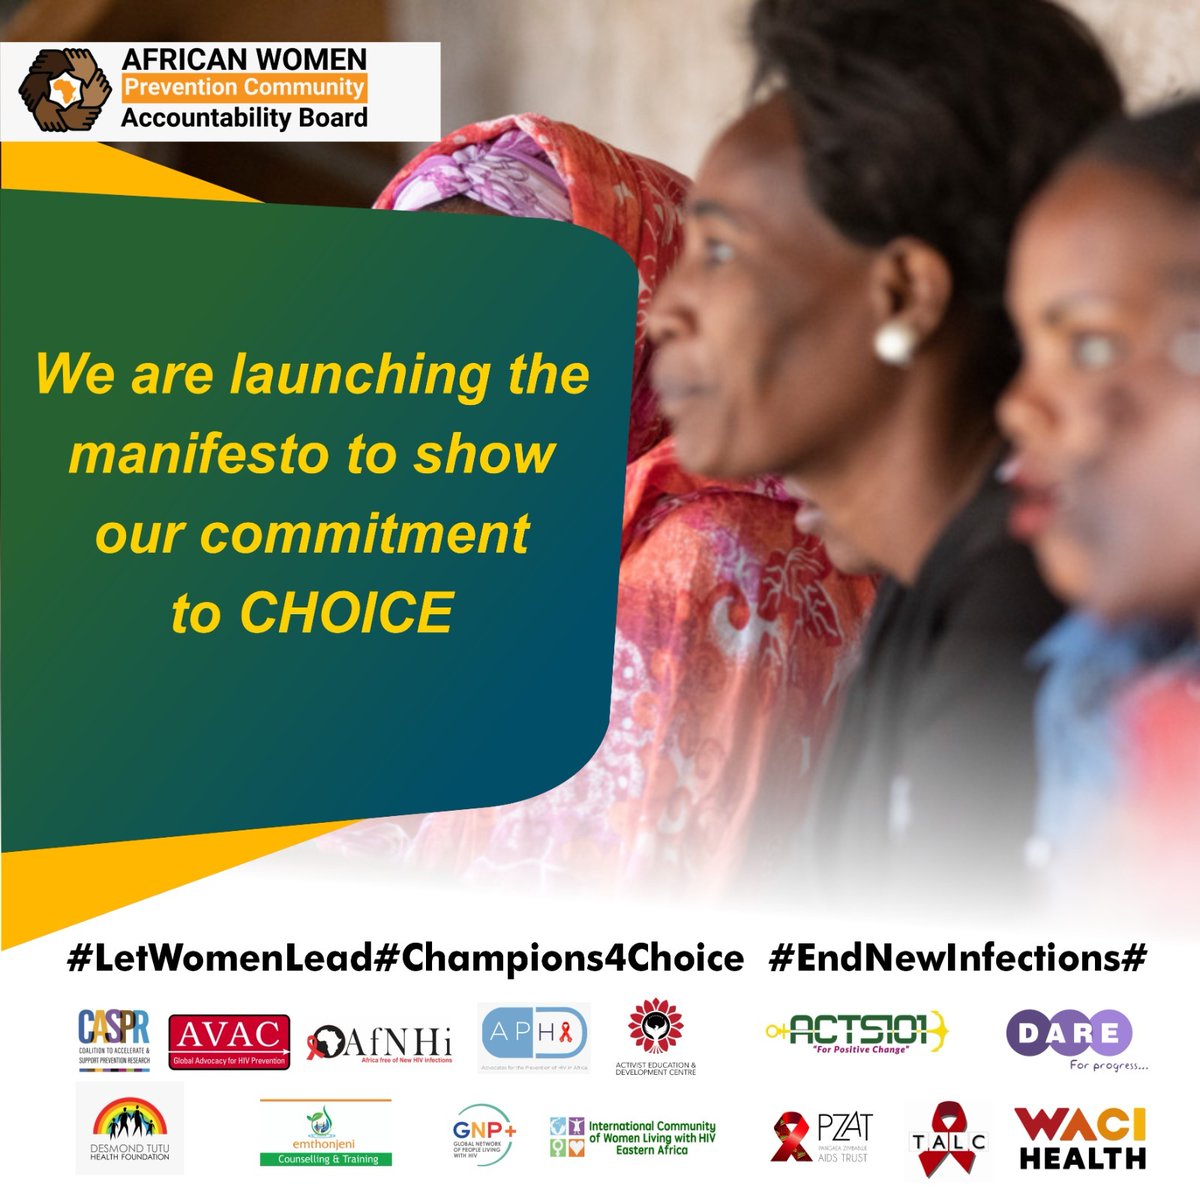 The #ChoiceManifesto is a commitment to community-driven interventions for women and girls governed by respect, integrity, and transparency. 
#EndNewInfections #Champions4Choice

@HIVpxresearch
@AfNHi_Tweets
@apha_sa
@Acts101U
@gnpplus
@Dareforprogress
@WACIHealth
@ICWEastAfrica